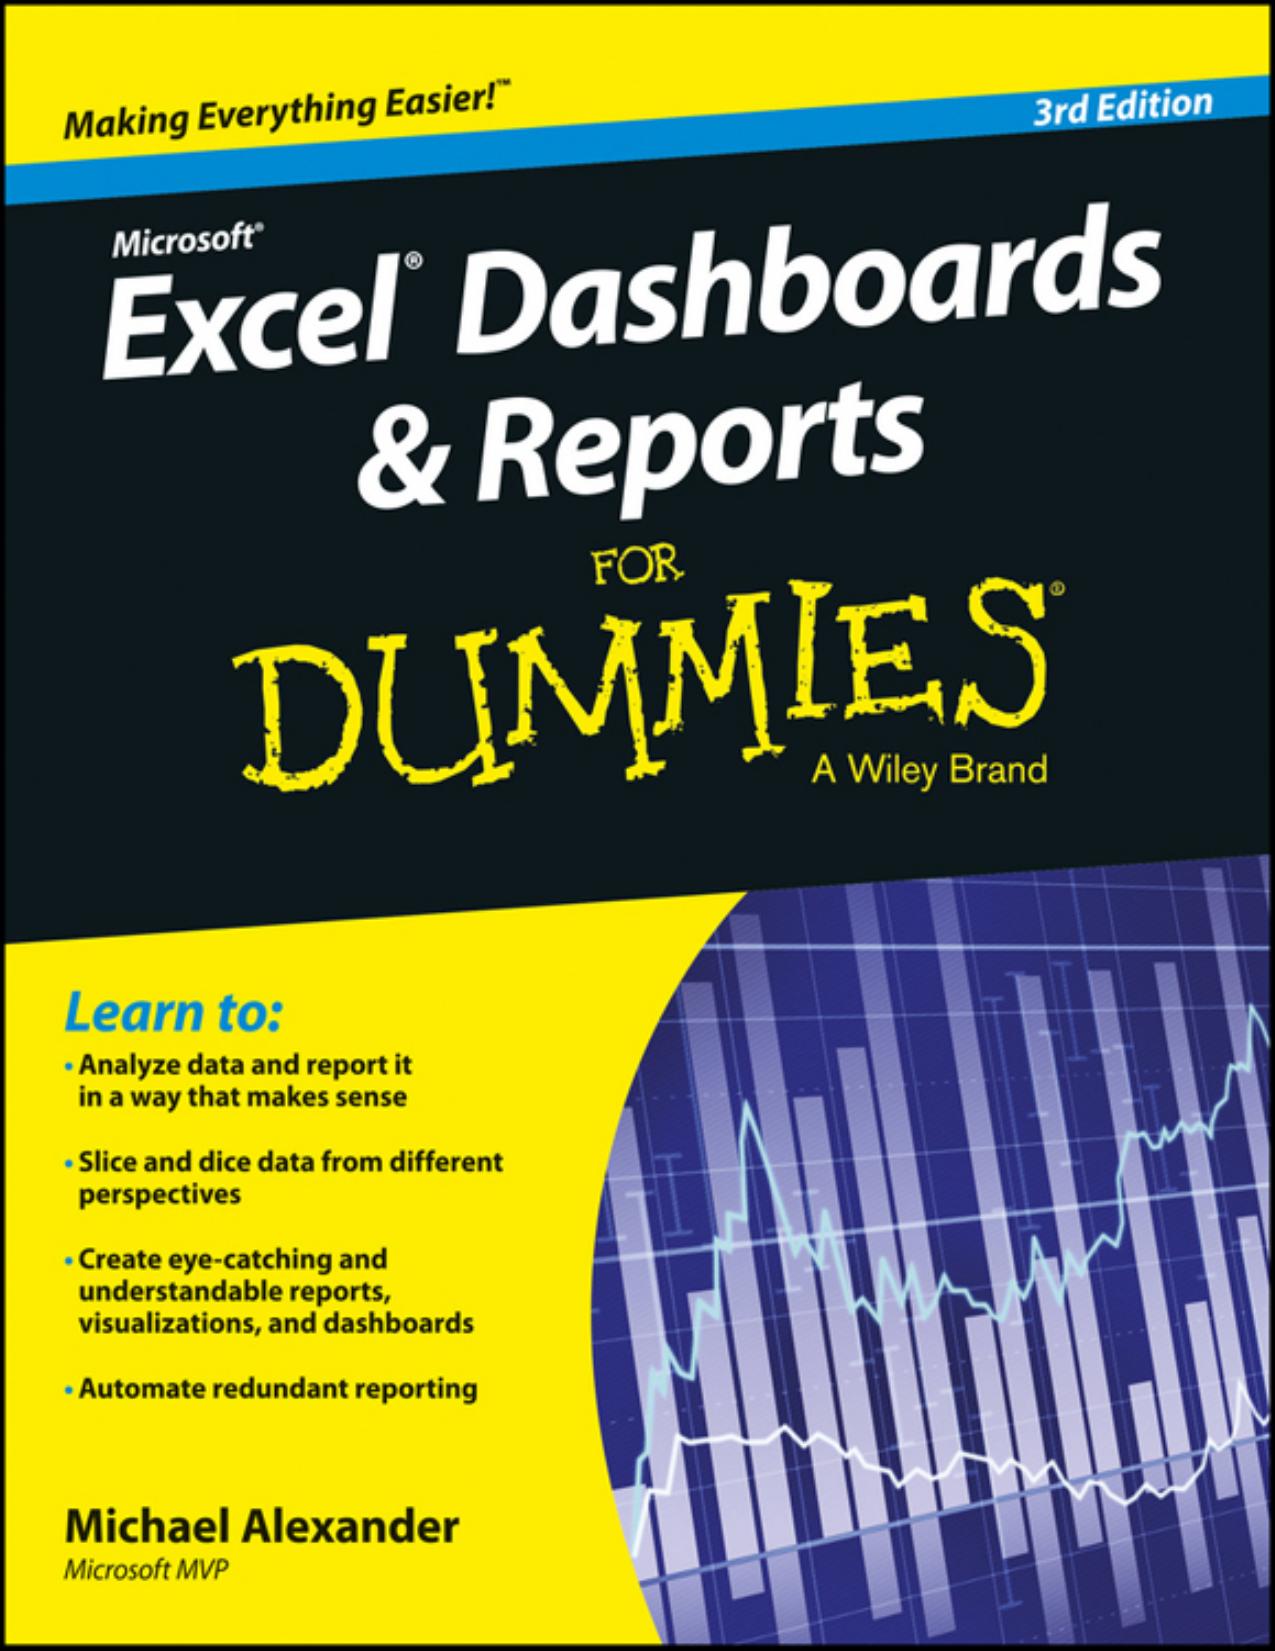 Excel Dashboards and Reports for Dummies by Michael Alexander